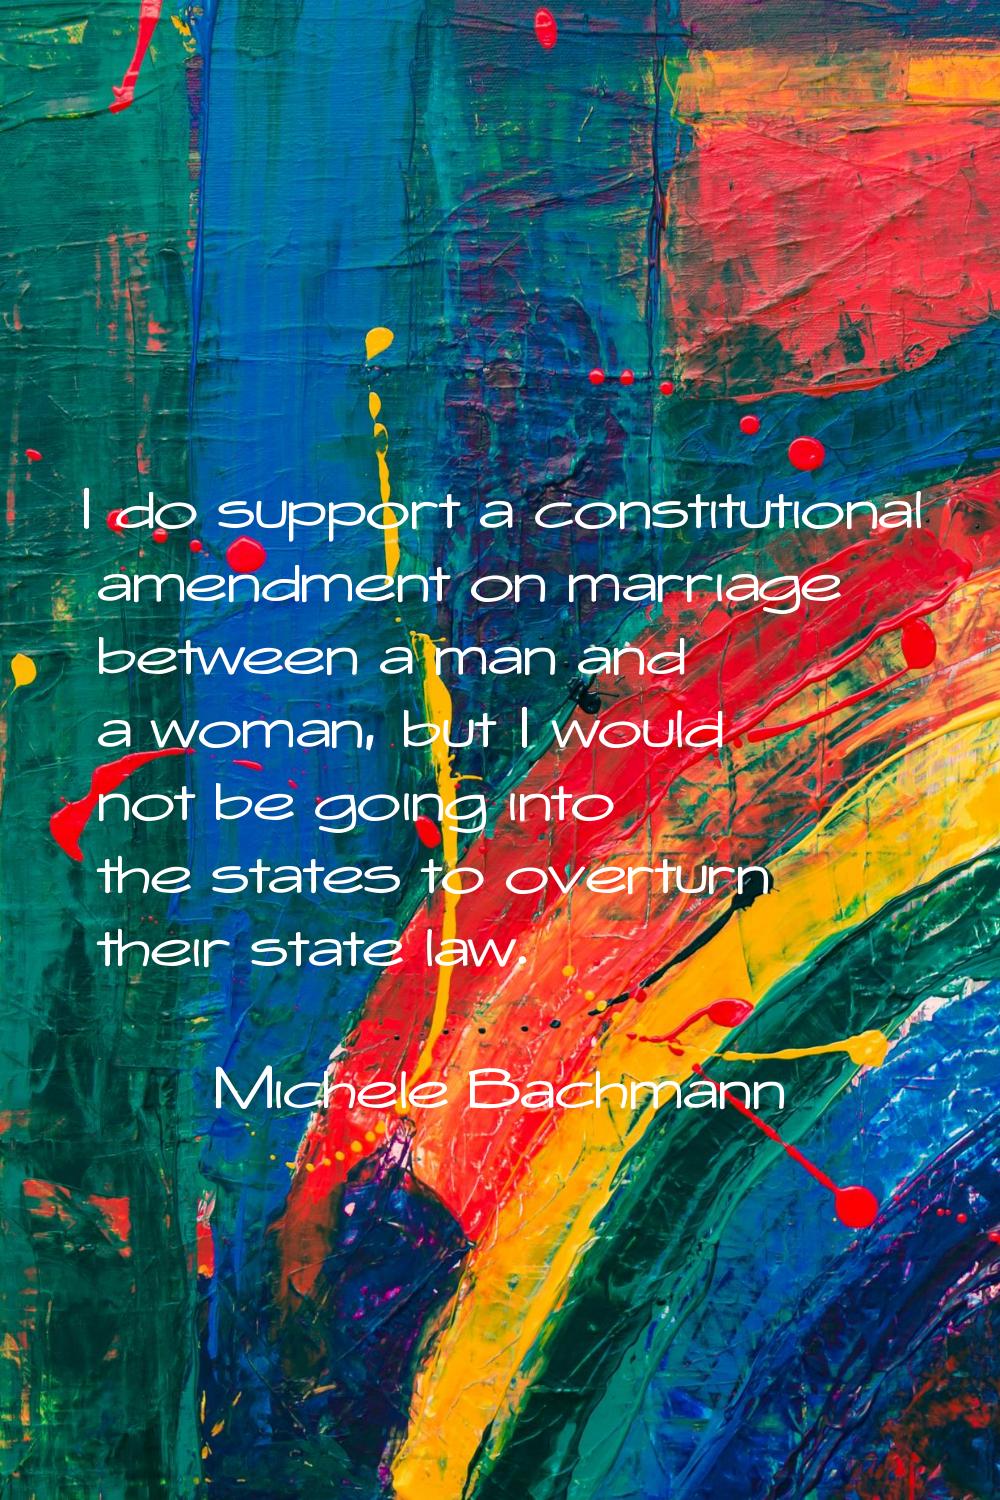 I do support a constitutional amendment on marriage between a man and a woman, but I would not be g